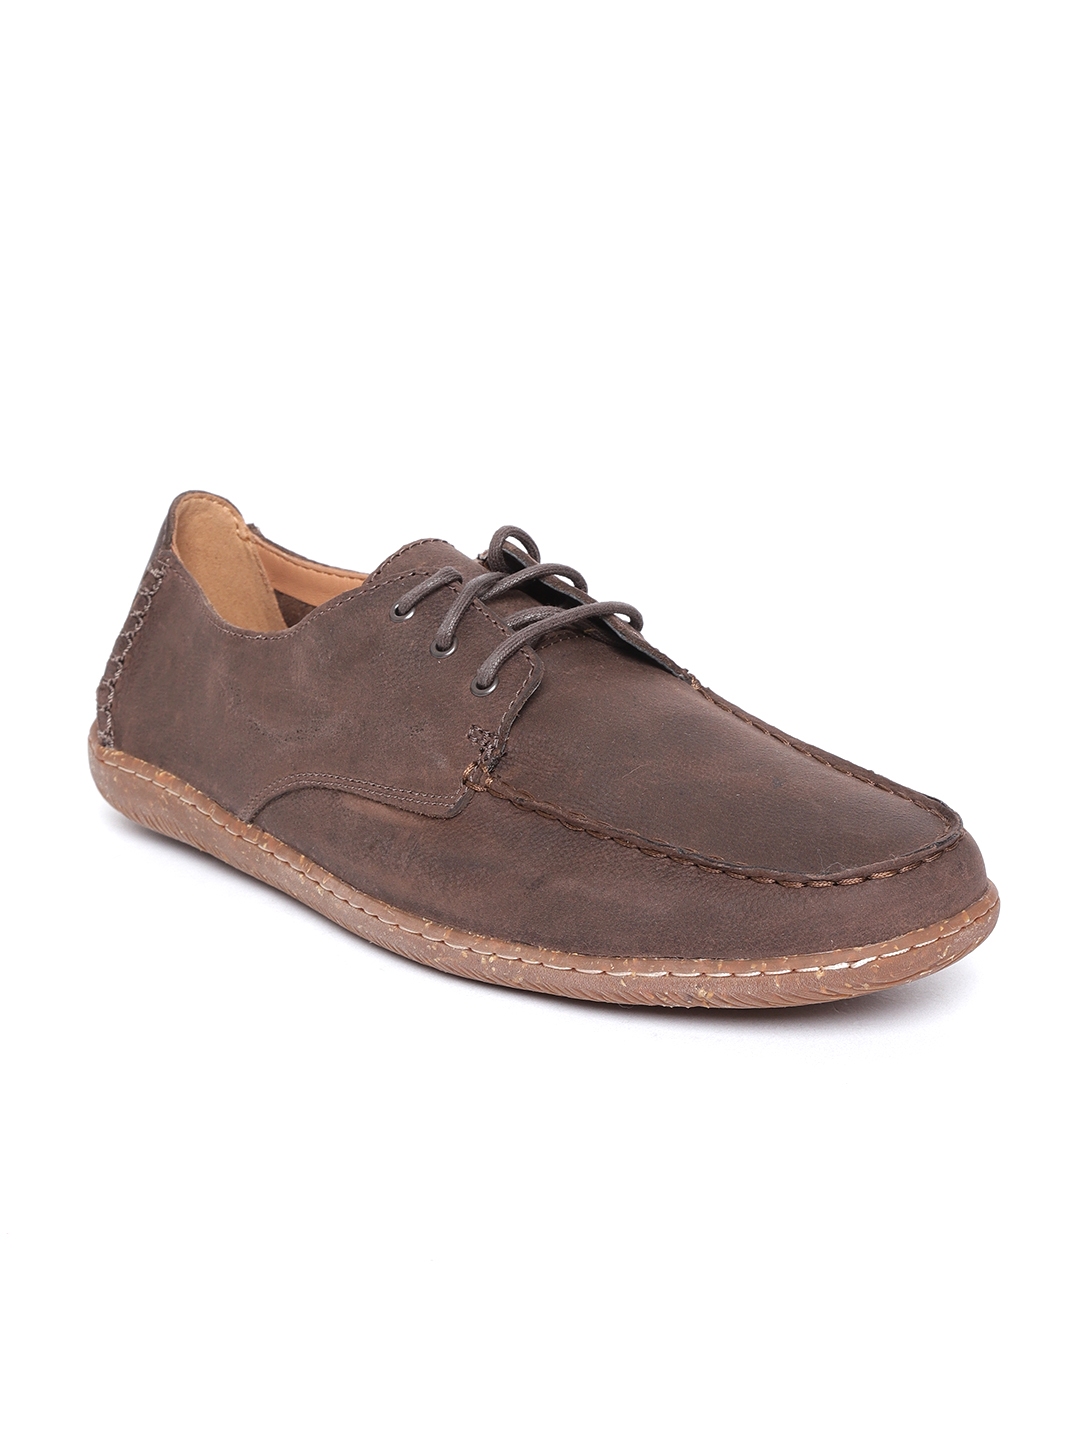 Buy Clarks Men Brown Leather Derbys - Casual Shoes for Men 7713775 | Myntra